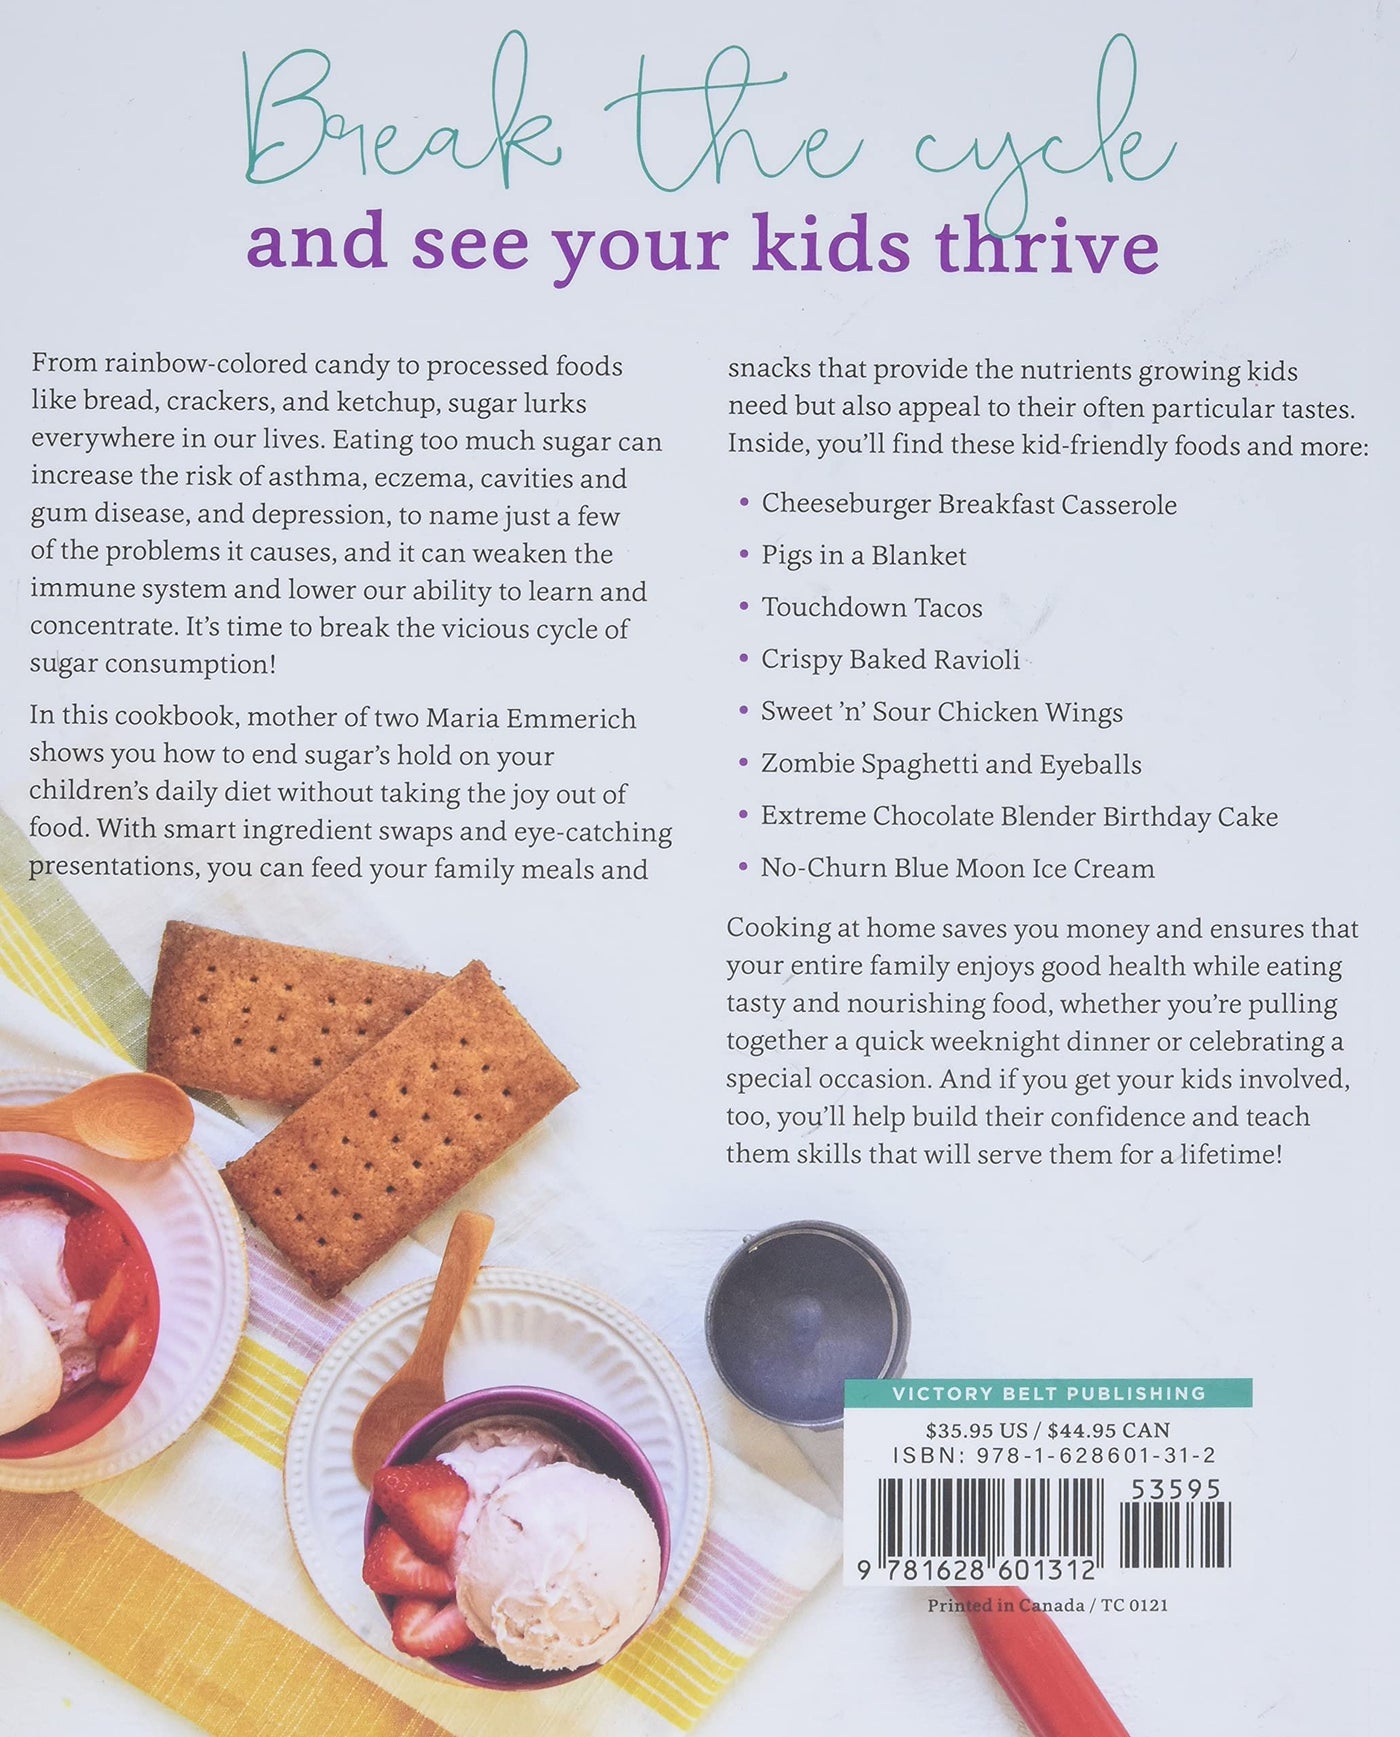 Sugar-Free Kids: Over 150 Fun & Easy Recipes to Keep the Whole Family Happy & Healthy (Spiral Bound)